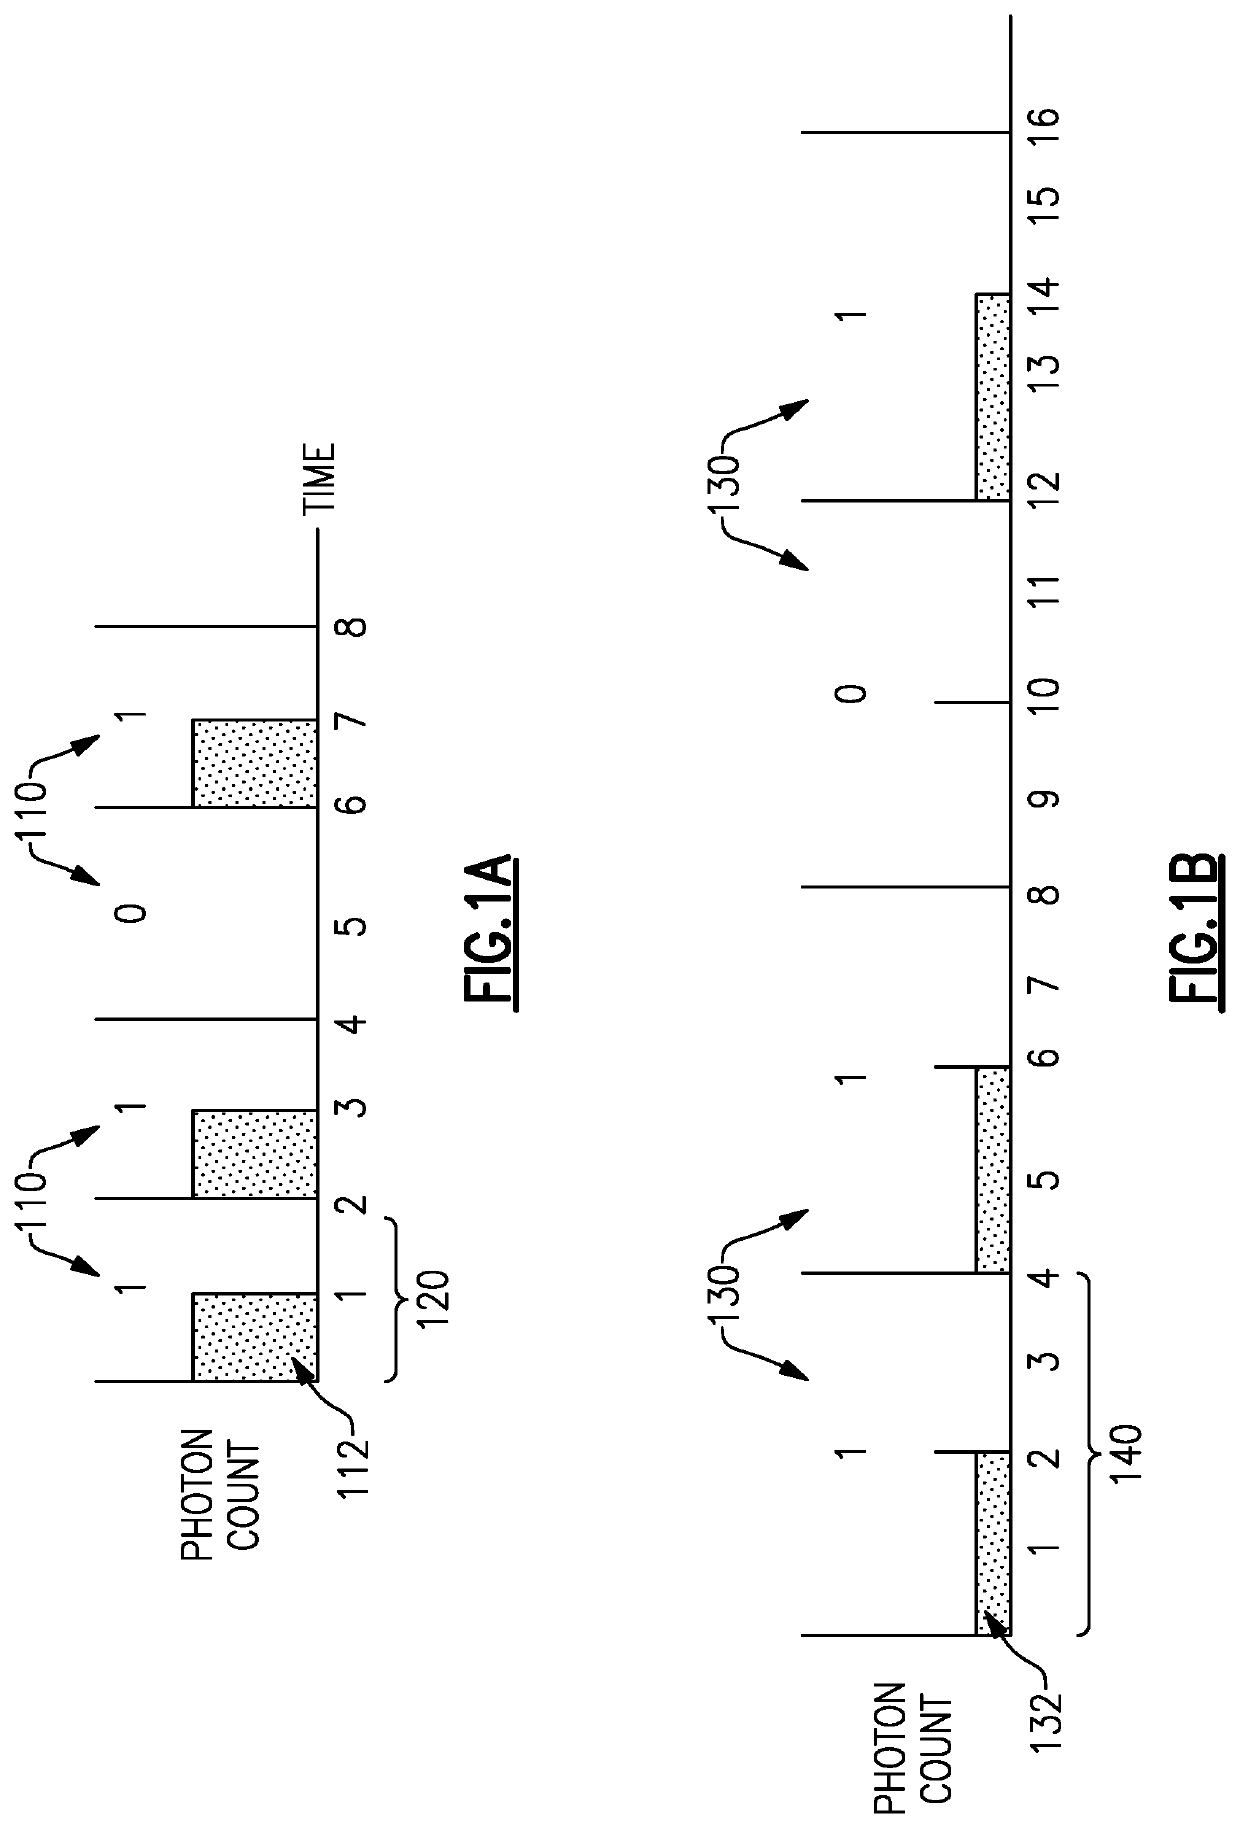 Methods and apparatus for reception of low photon density optical signals